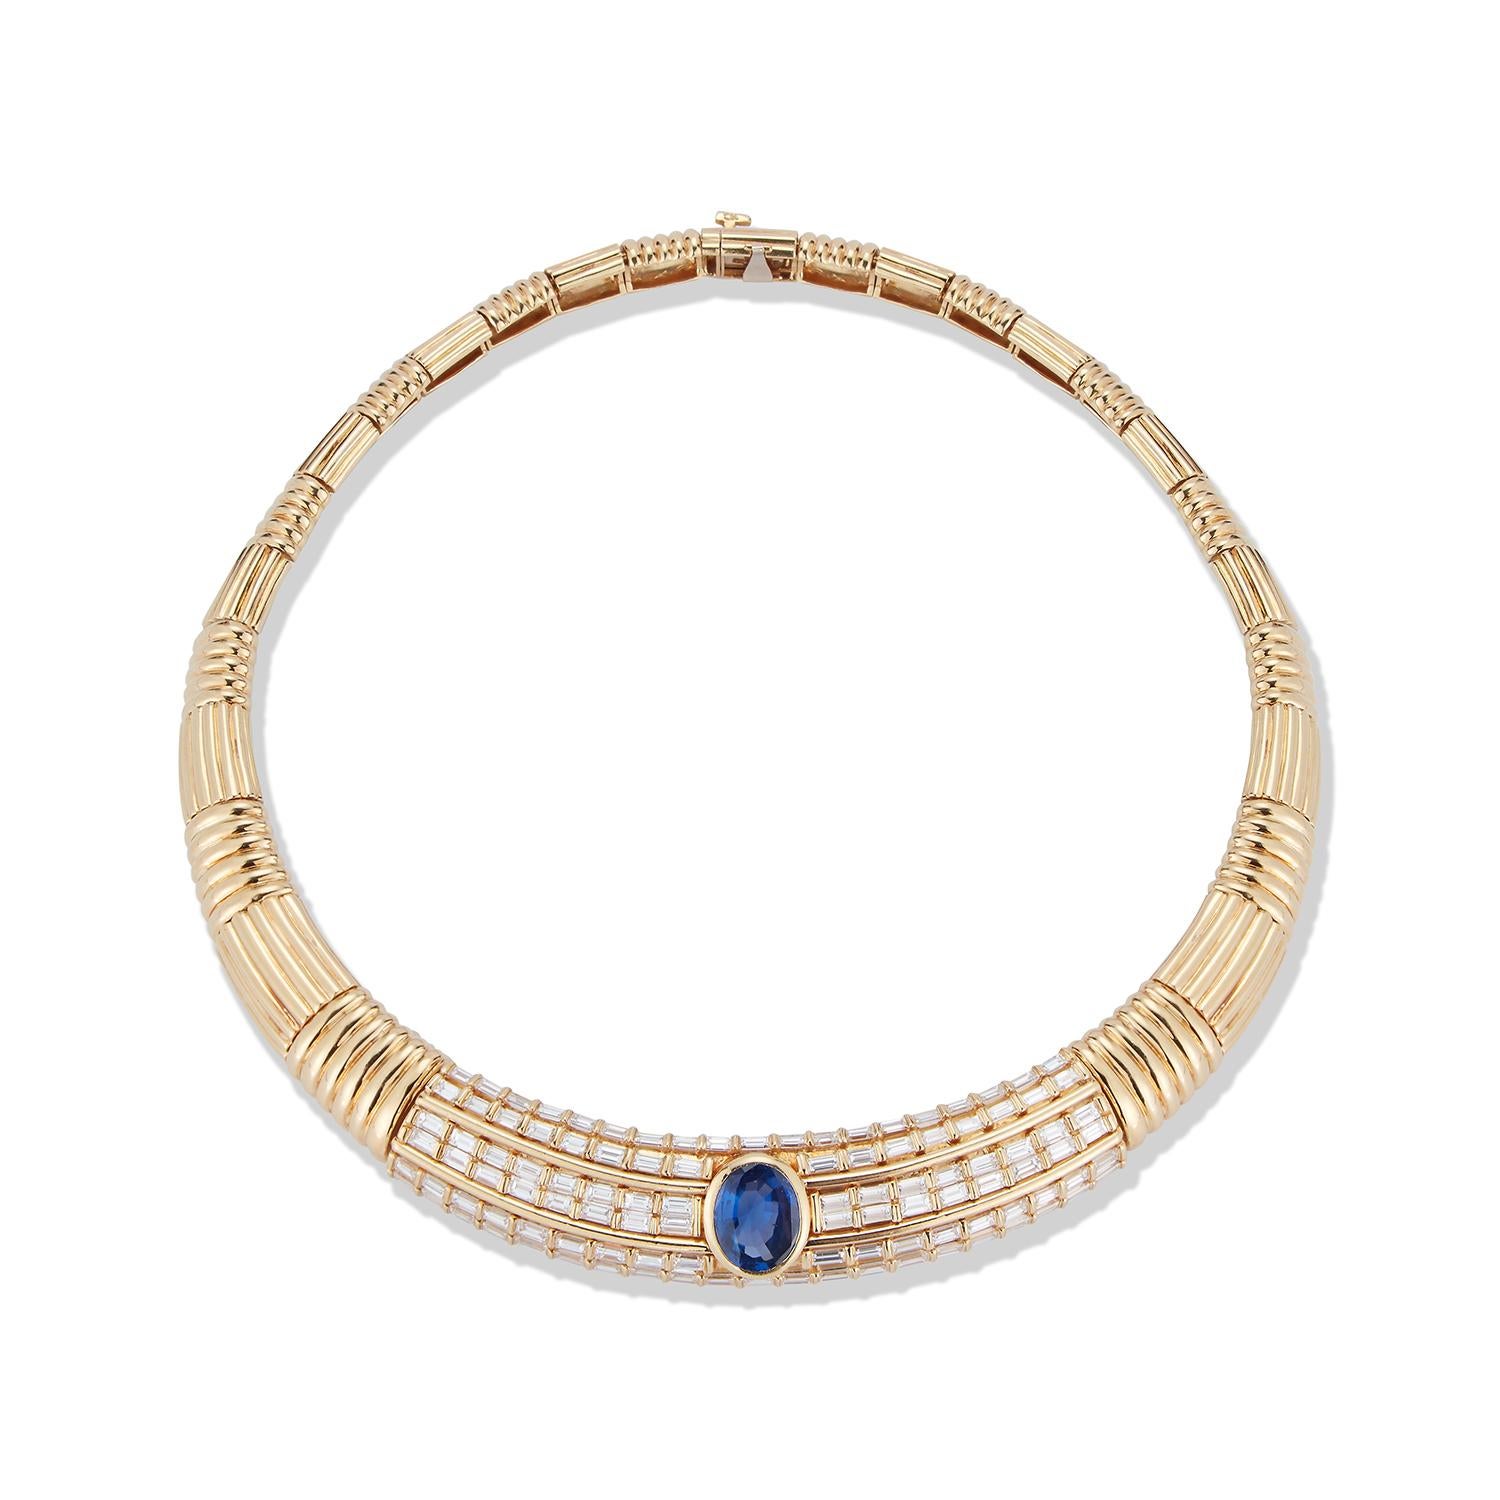 Natural Ceylon Sapphire & Diamond Gold Necklace 
Sapphire set along side four rows of Beautiful Baguettes 
AGL Certified 
Approx Sapphire Weight: 8.00 Cts
Approx Diamond Weight: 10.60 Cts
Approx Measurements: 15.5 inches in diameter
18K Yellow Gold
